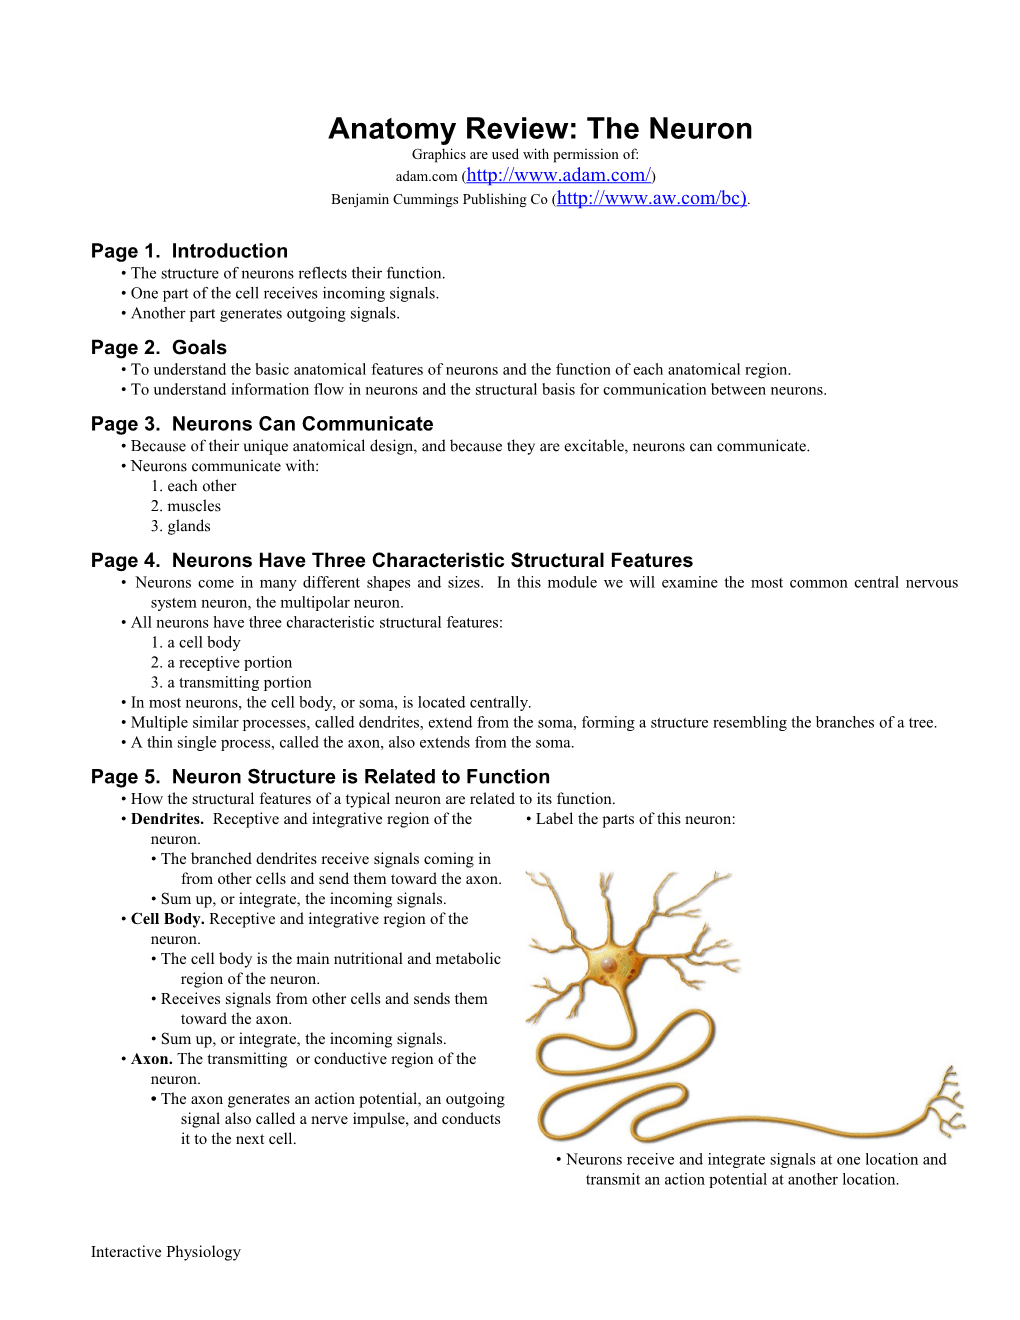 Anatomy Review: the Neuron